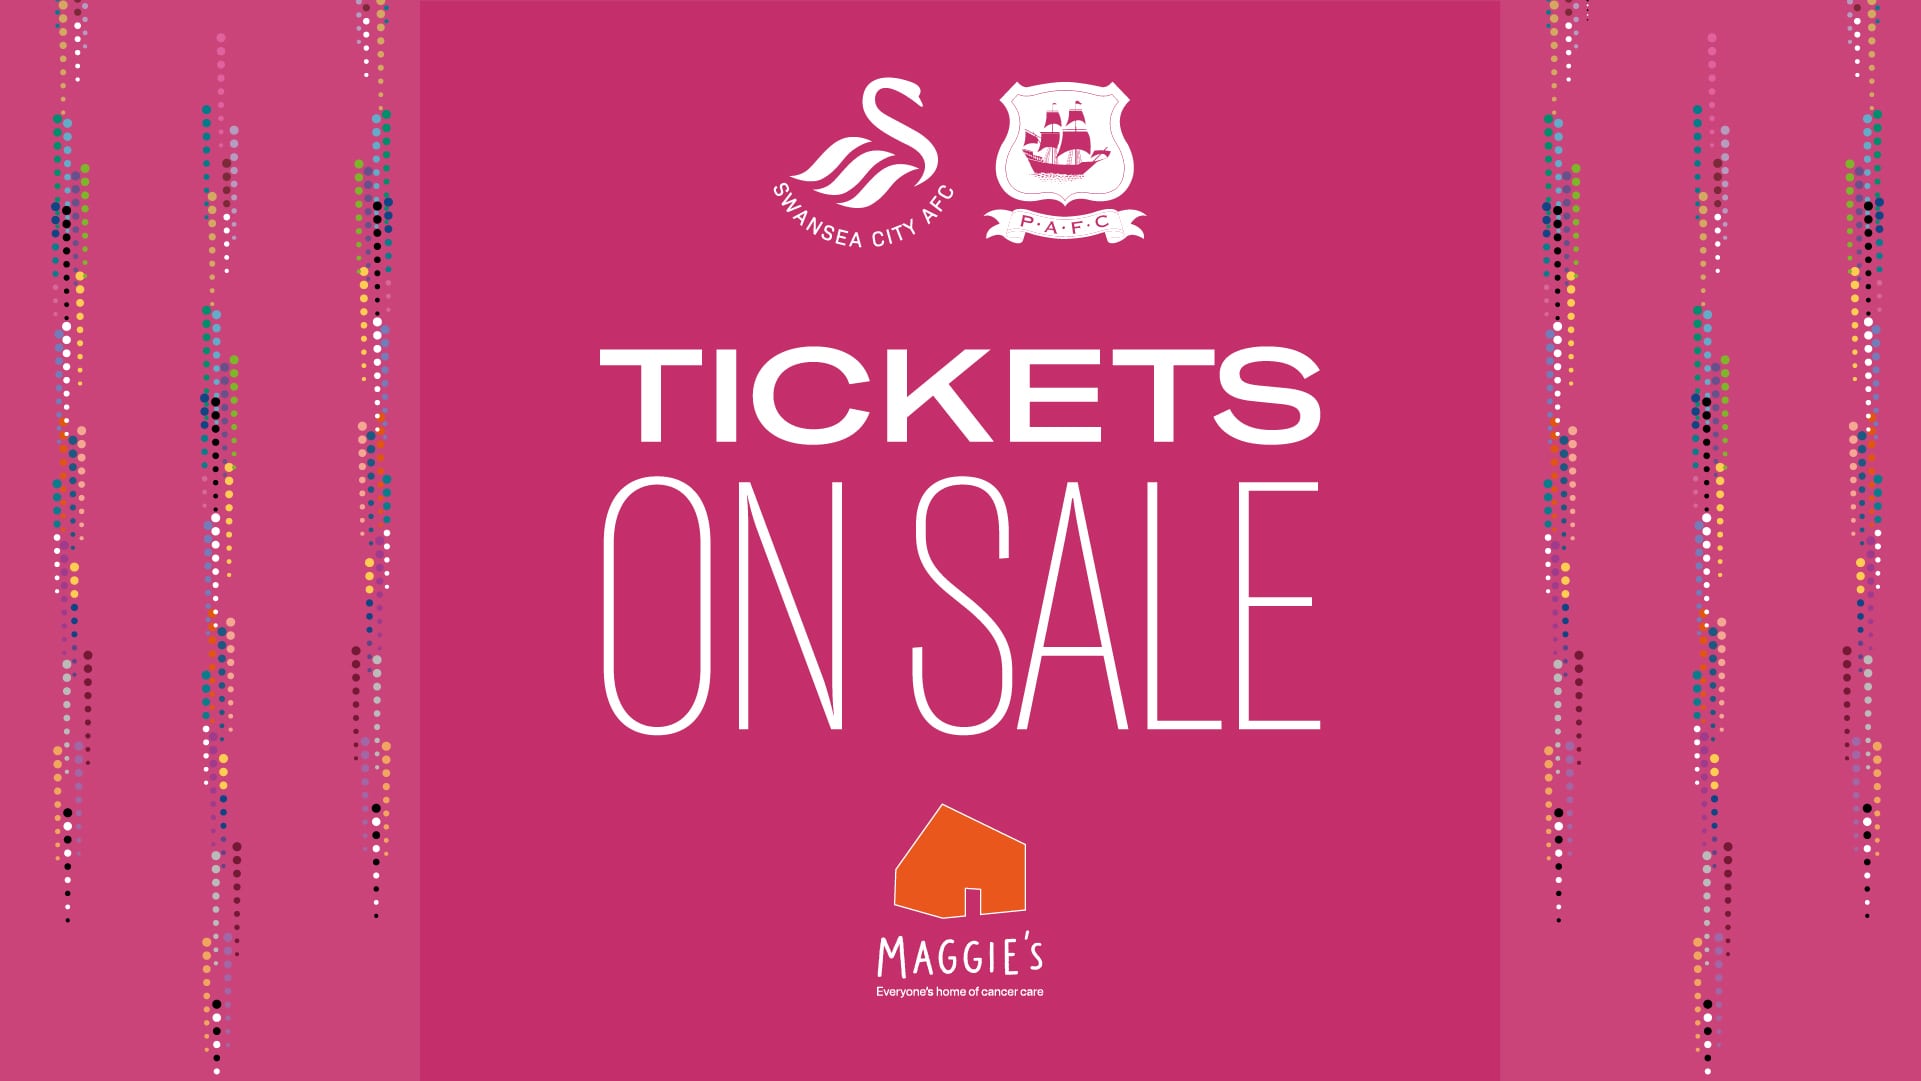 Tickets on sale for Plymouth at home. The match is dedicated to Maggie's Swansea